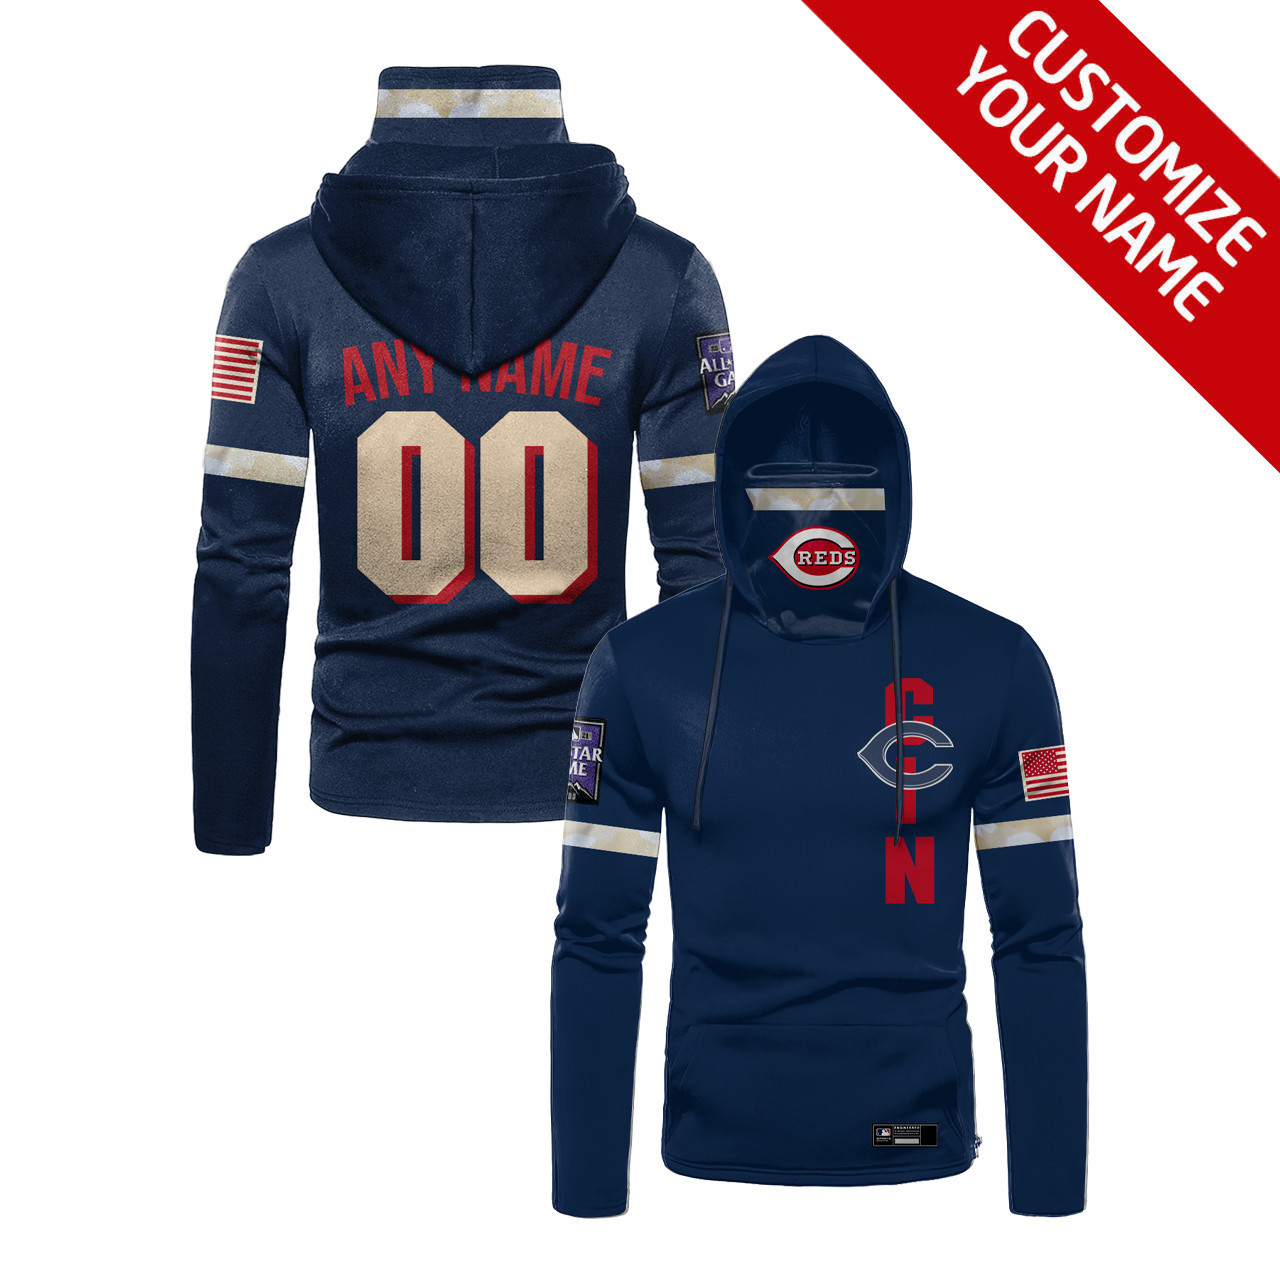 Chicago Bears #00 Nfl Team Purple Style Gift With Custom Number Name For Chicago Bears Fans Hoodie